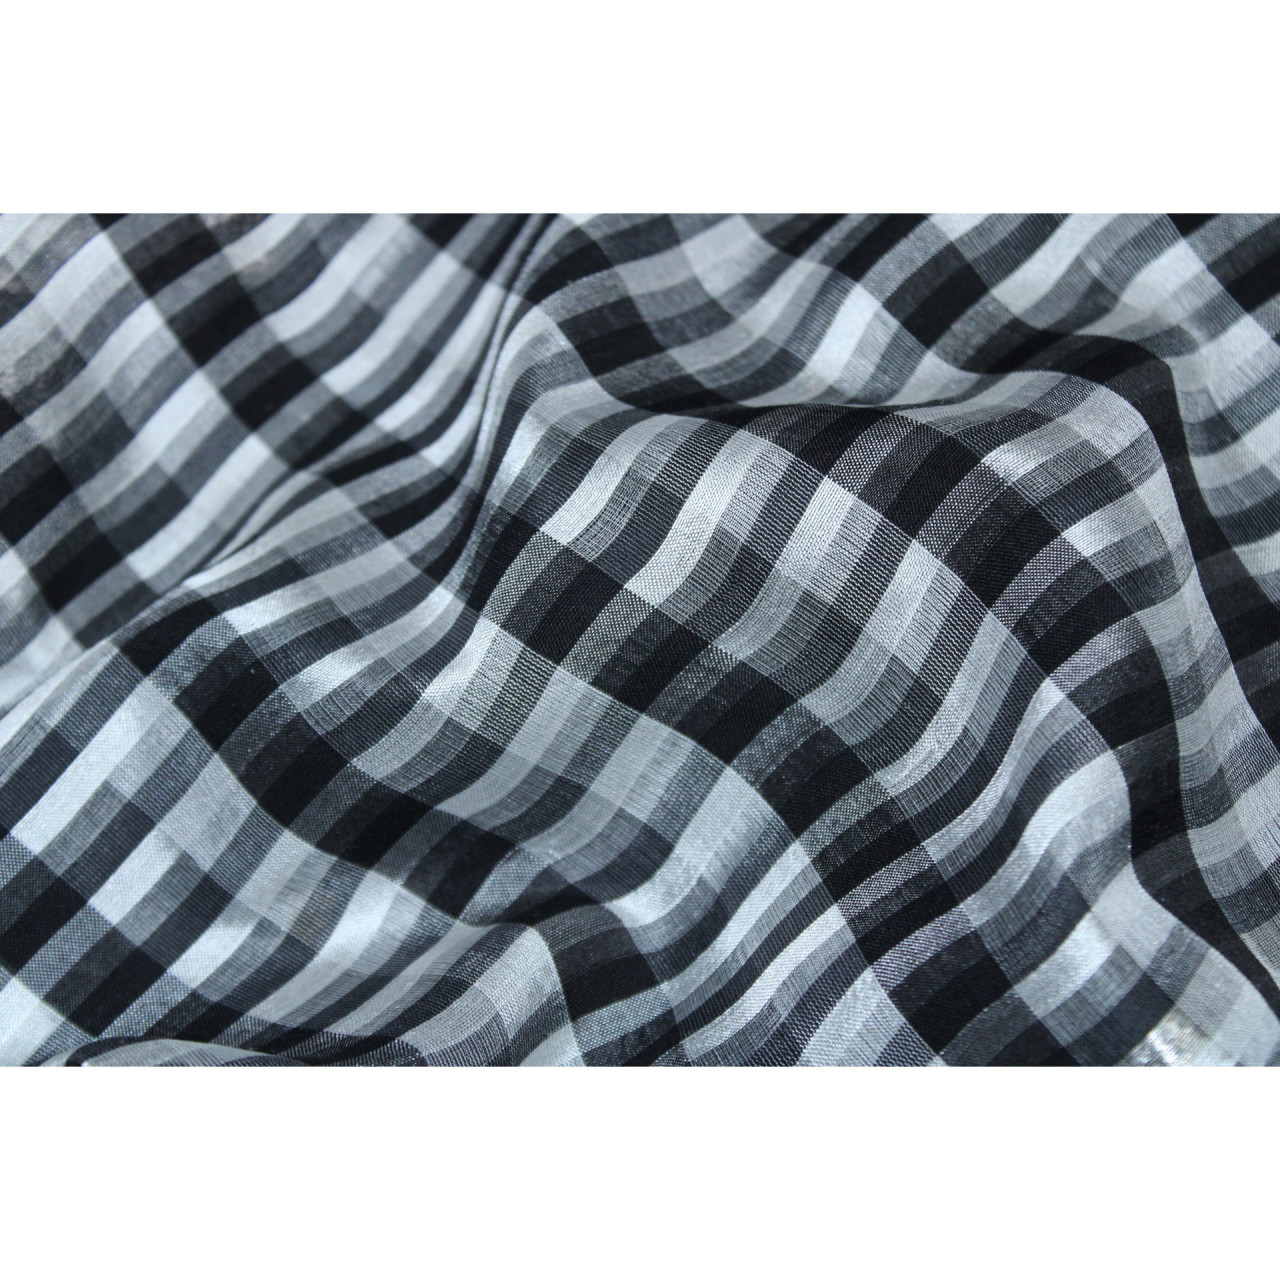 (2172) Mulberry silk and cotton Azo-free dyed stole from Maheshwar - Black, white, checks, silver zari, stripes